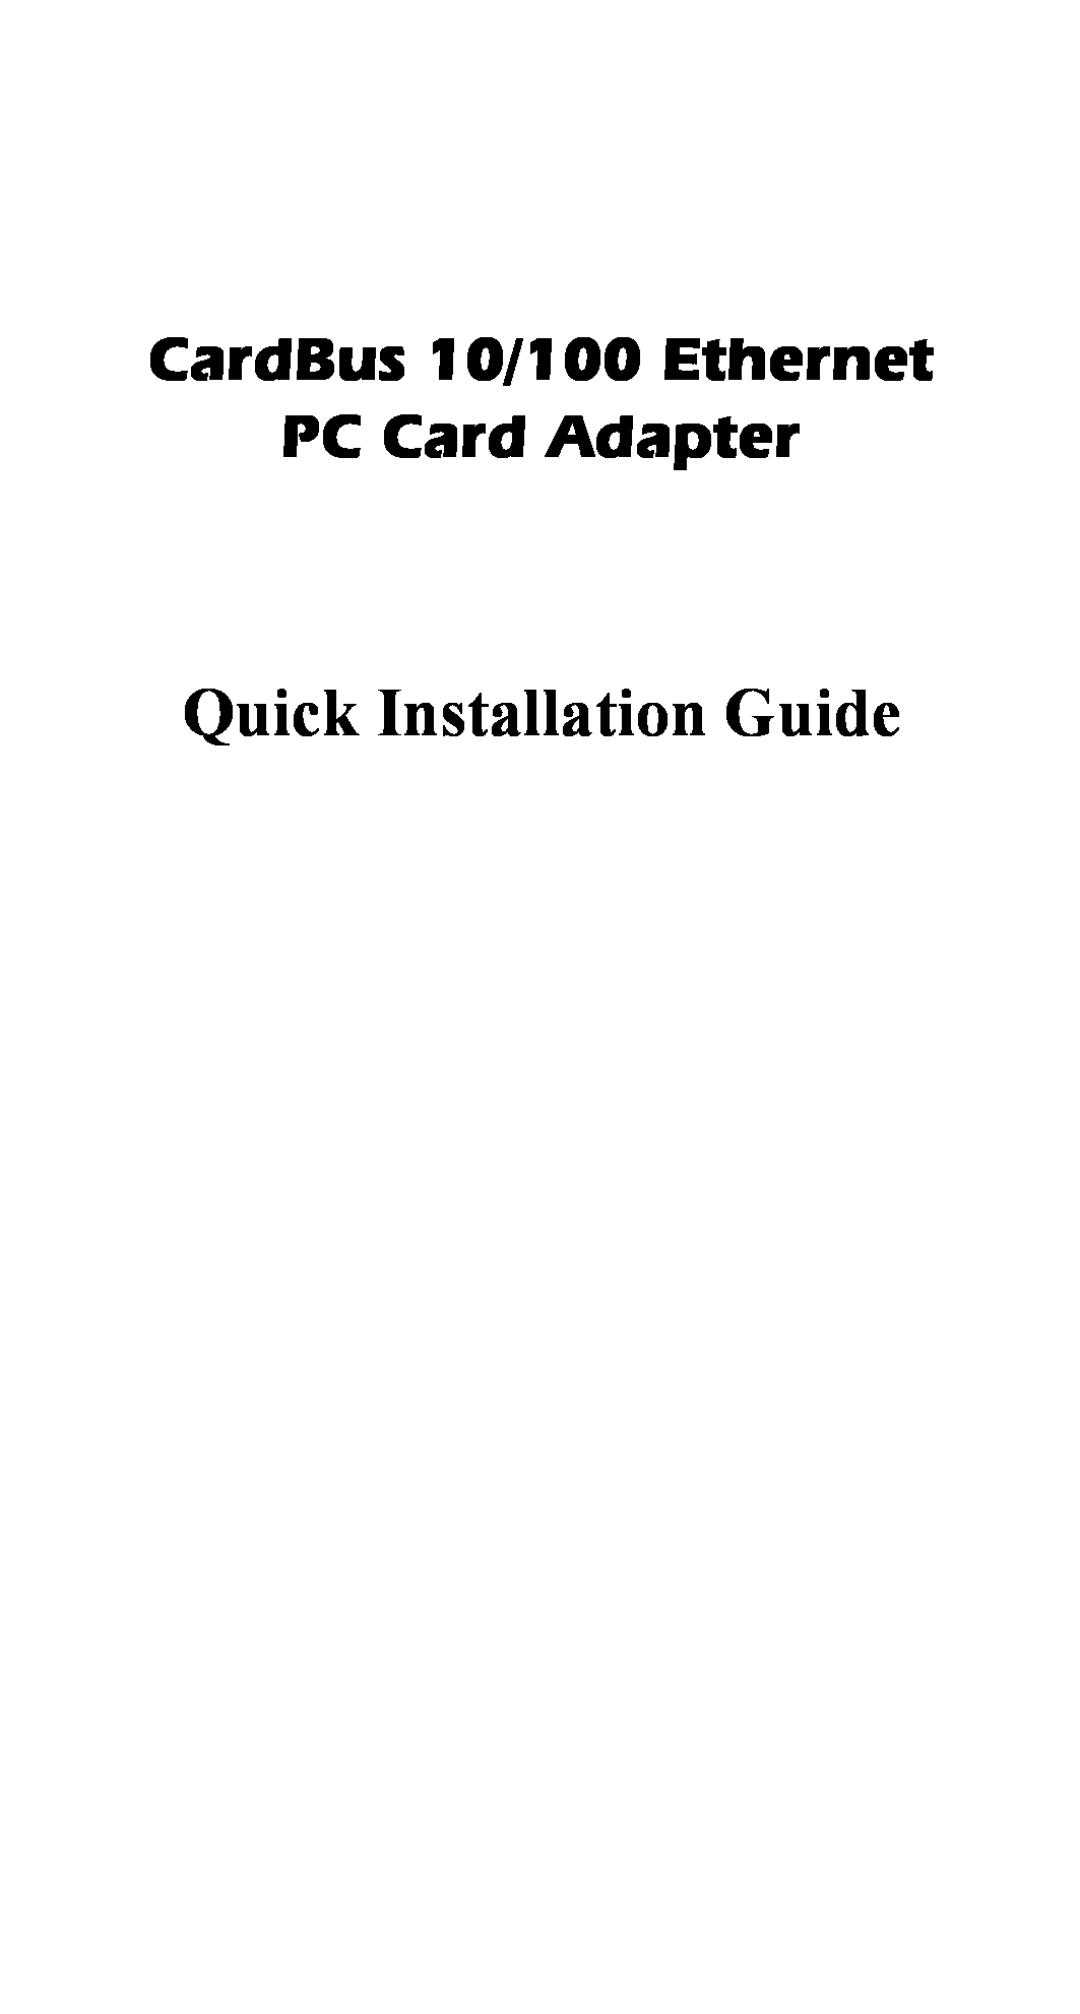 Abocom FE2000 manual Quick Installation Guide, CardBus 10/100 Ethernet PC Card Adapter 